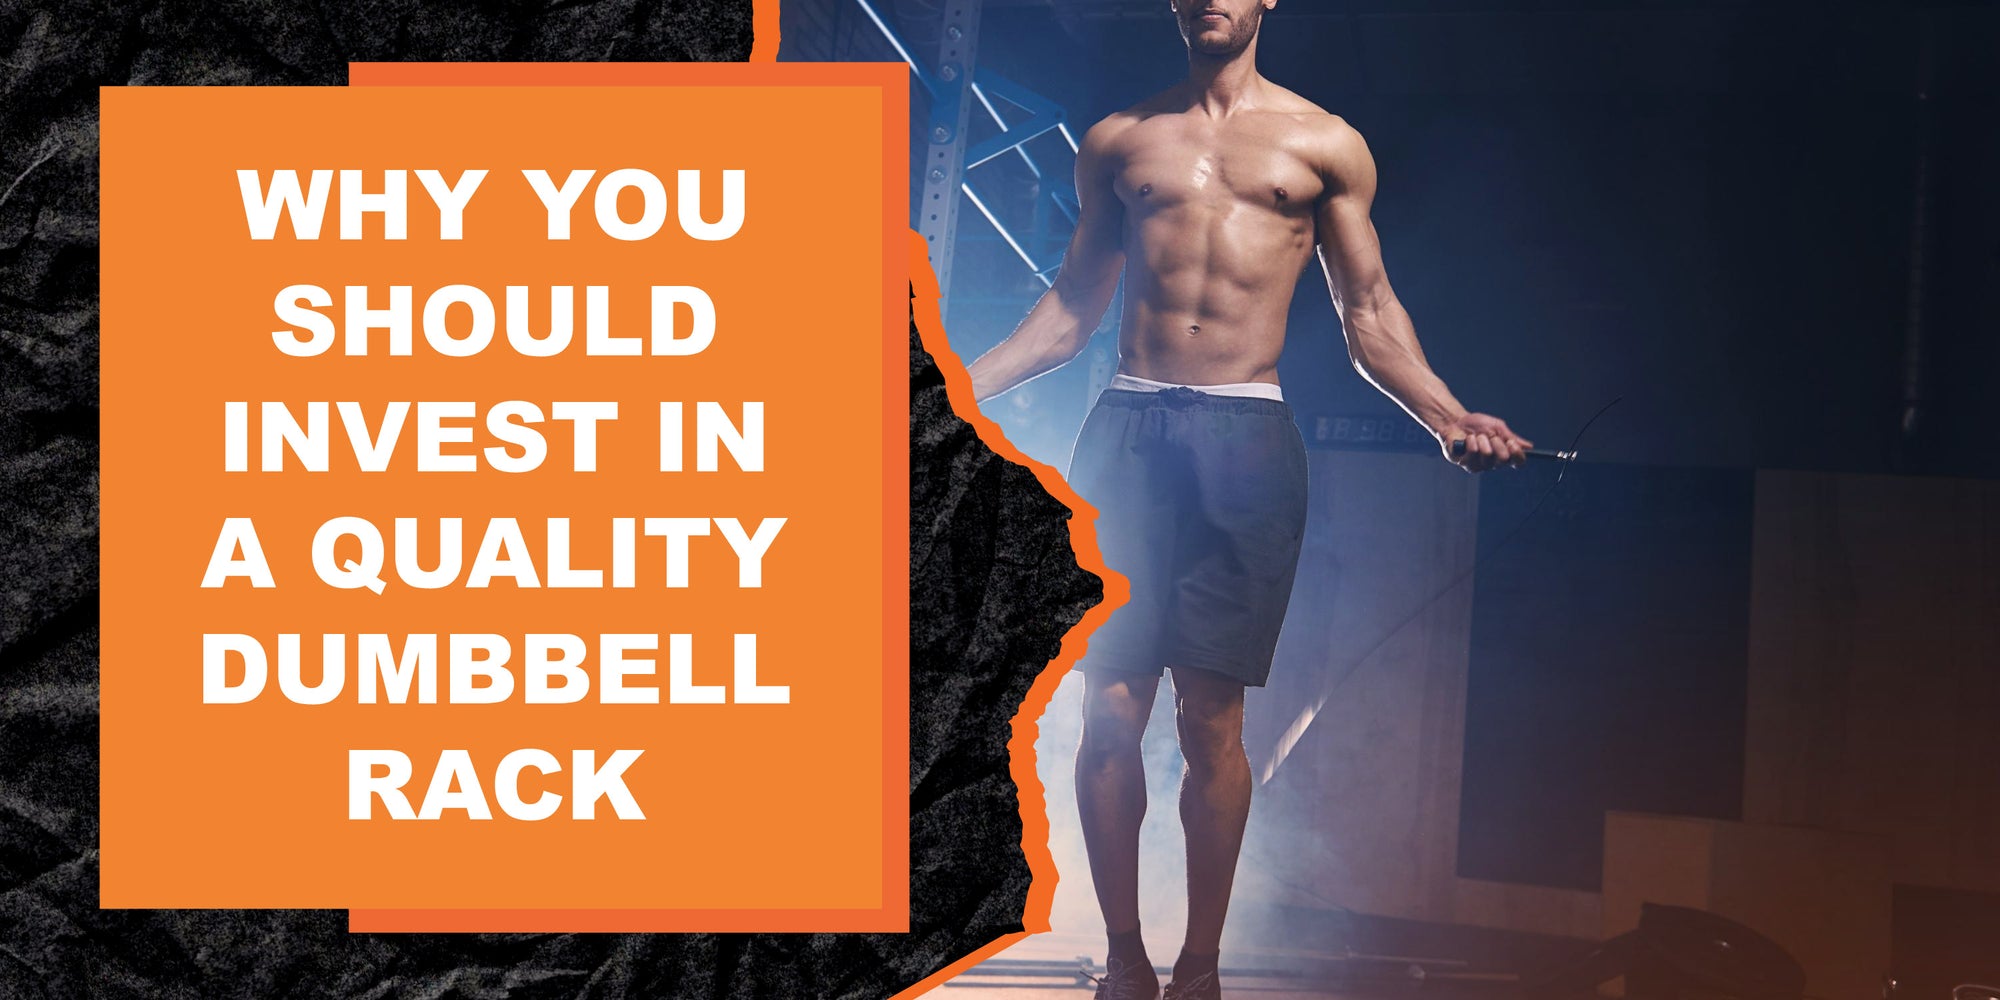 Why You Should Invest in a Quality Dumbbell Rack